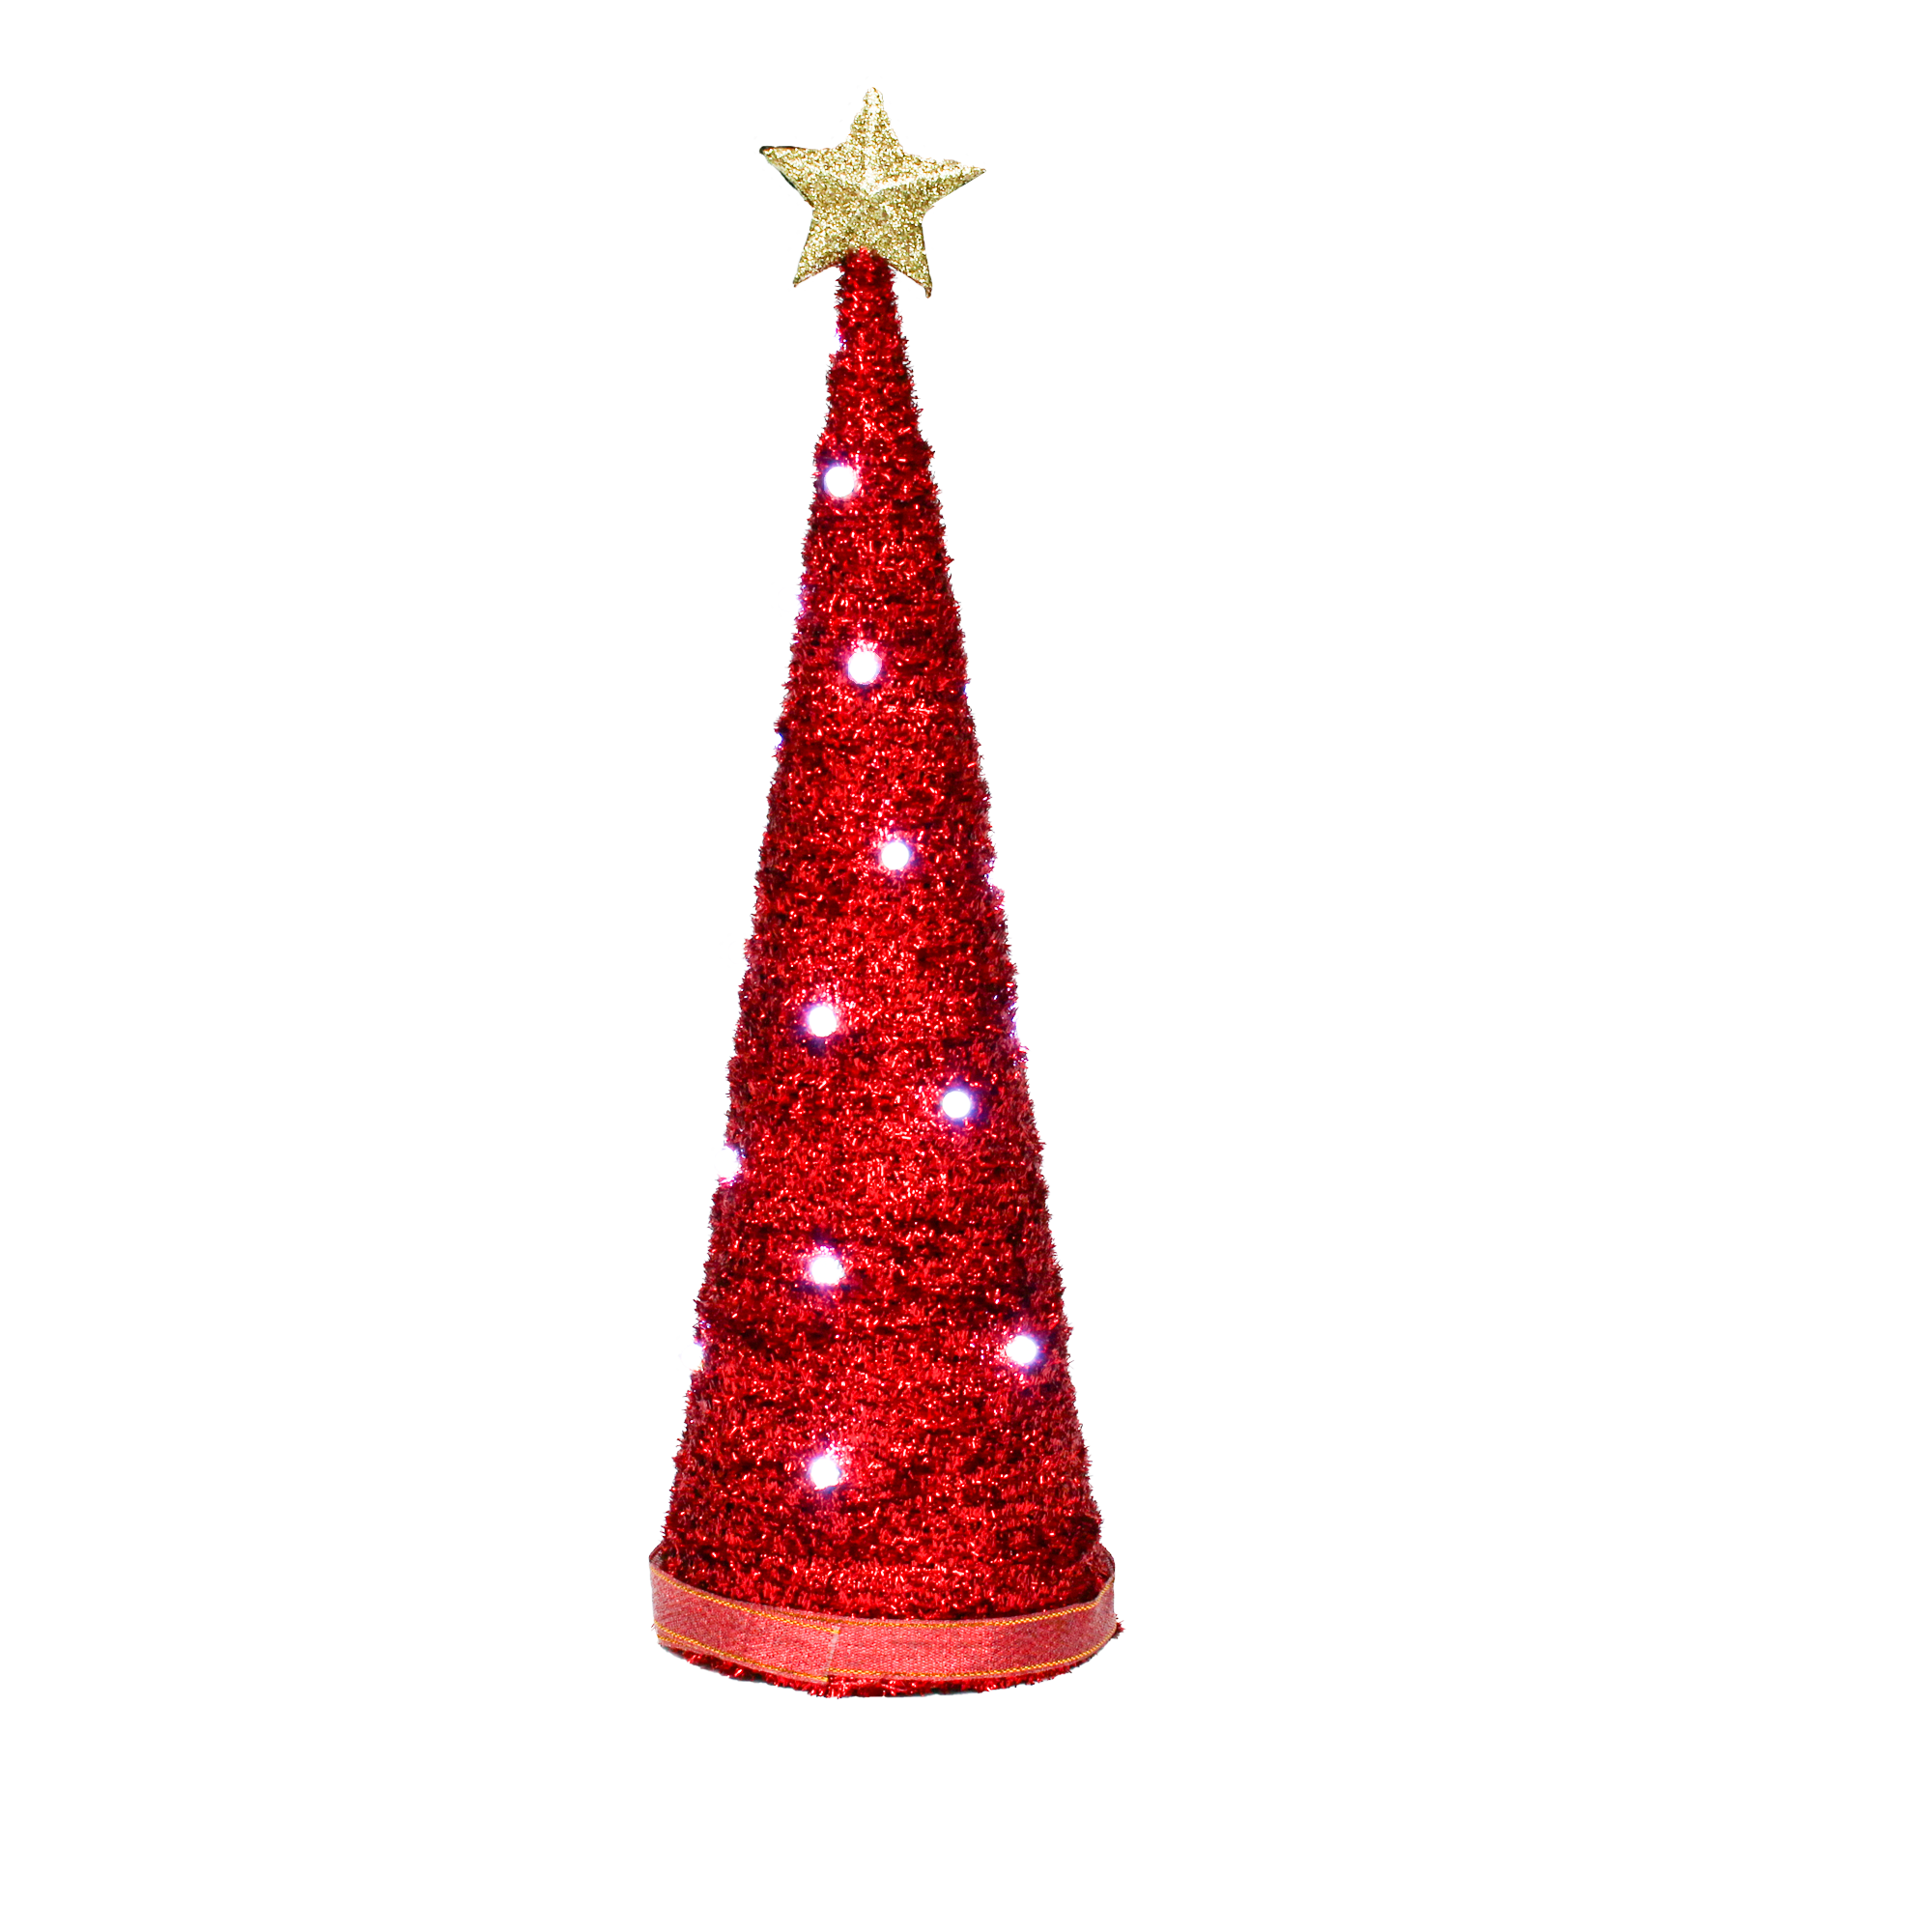 Handmade Conical Christmas Tinsel Tree with LED Light, 14.5 X 4inch, Red, 1pc